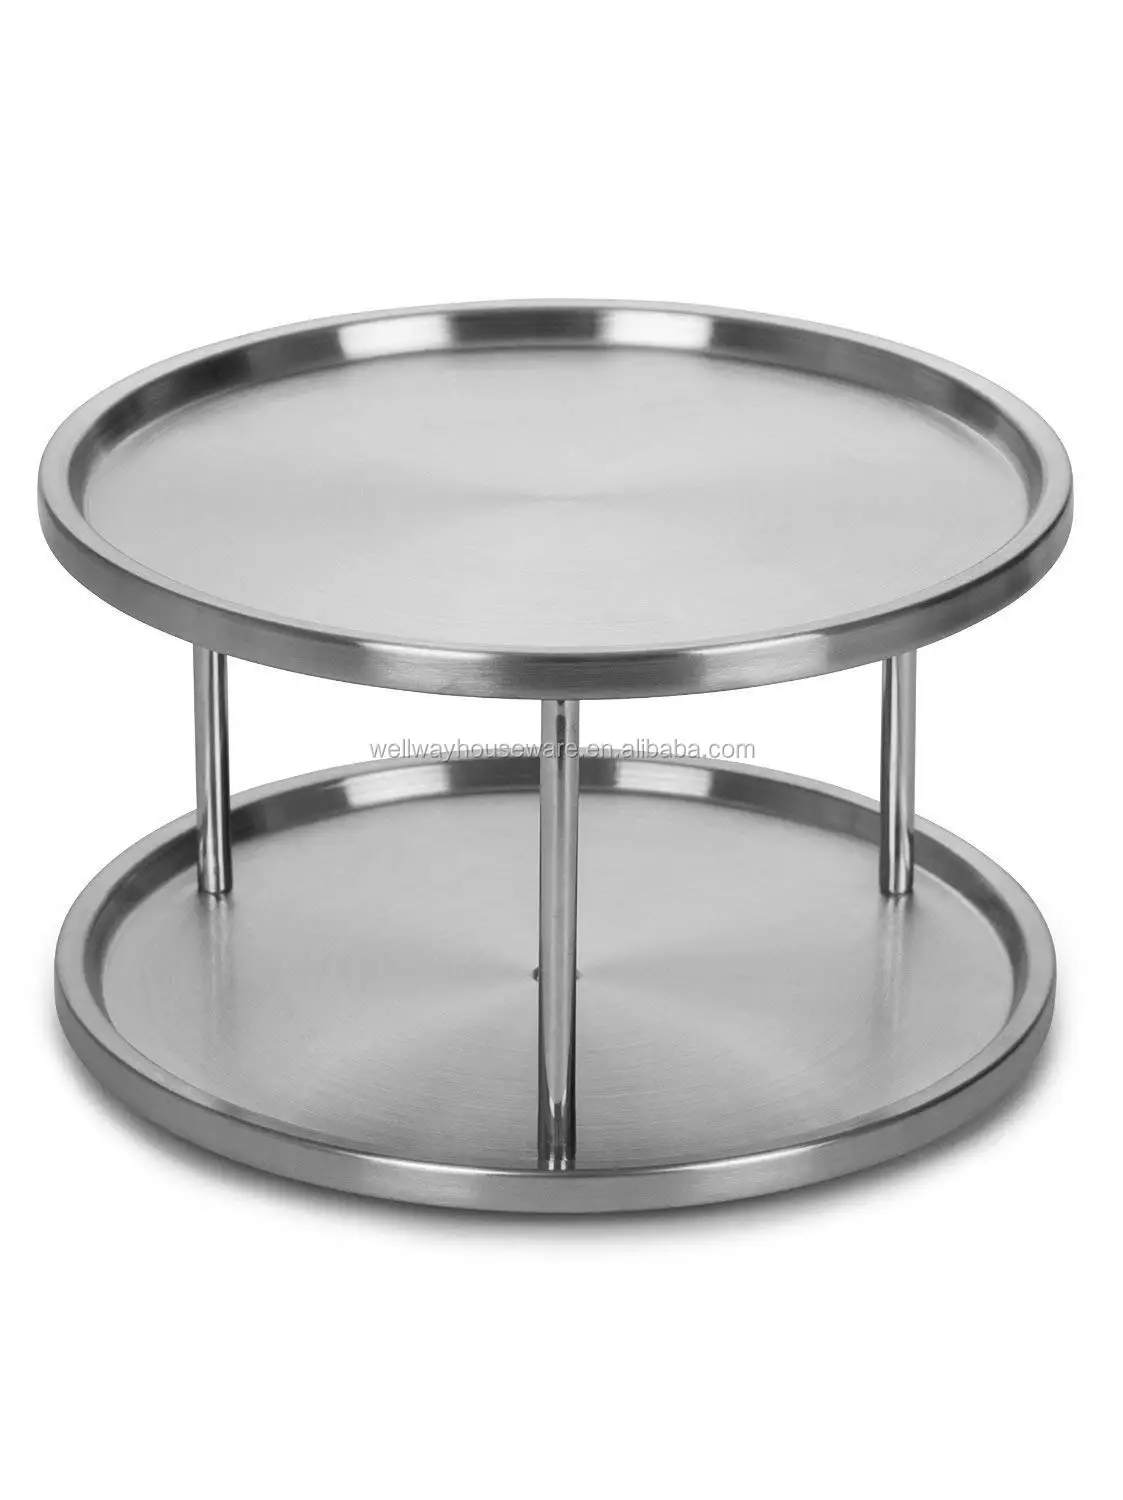 Stainless Steel 2 Tier Lazy Susan Turntable For A Spice Organizer